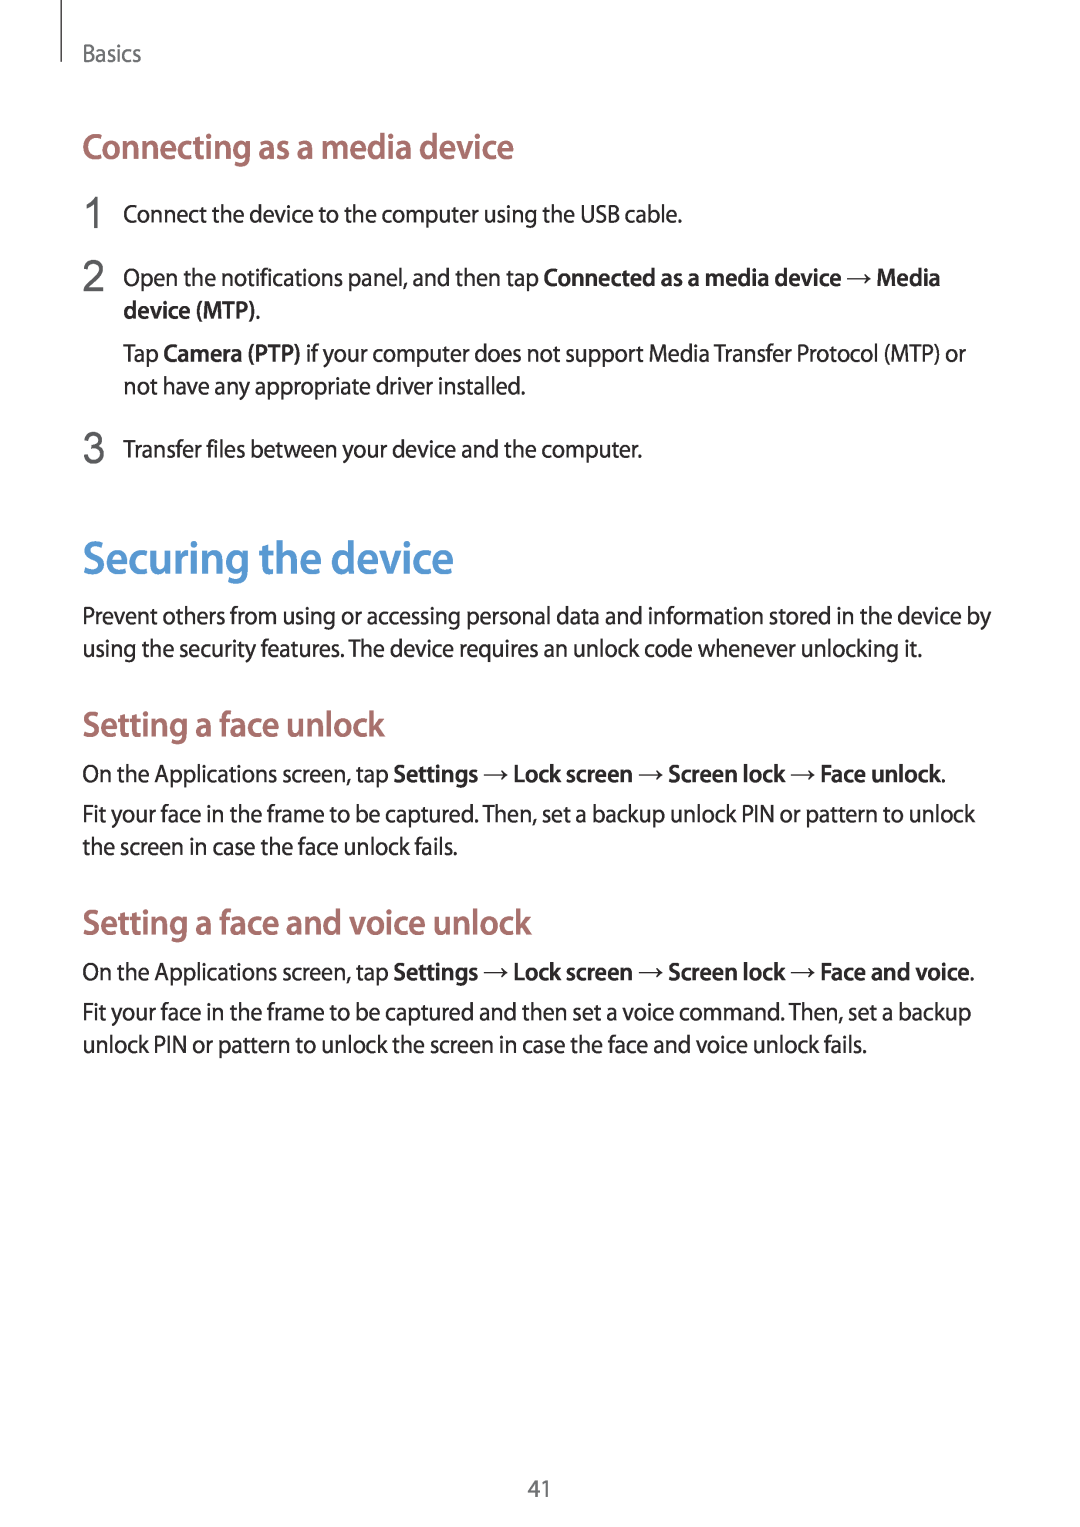 Samsung GT-I8190GRNTMZ manual Securing the device, Connecting as a media device, Setting a face unlock, device MTP, Basics 